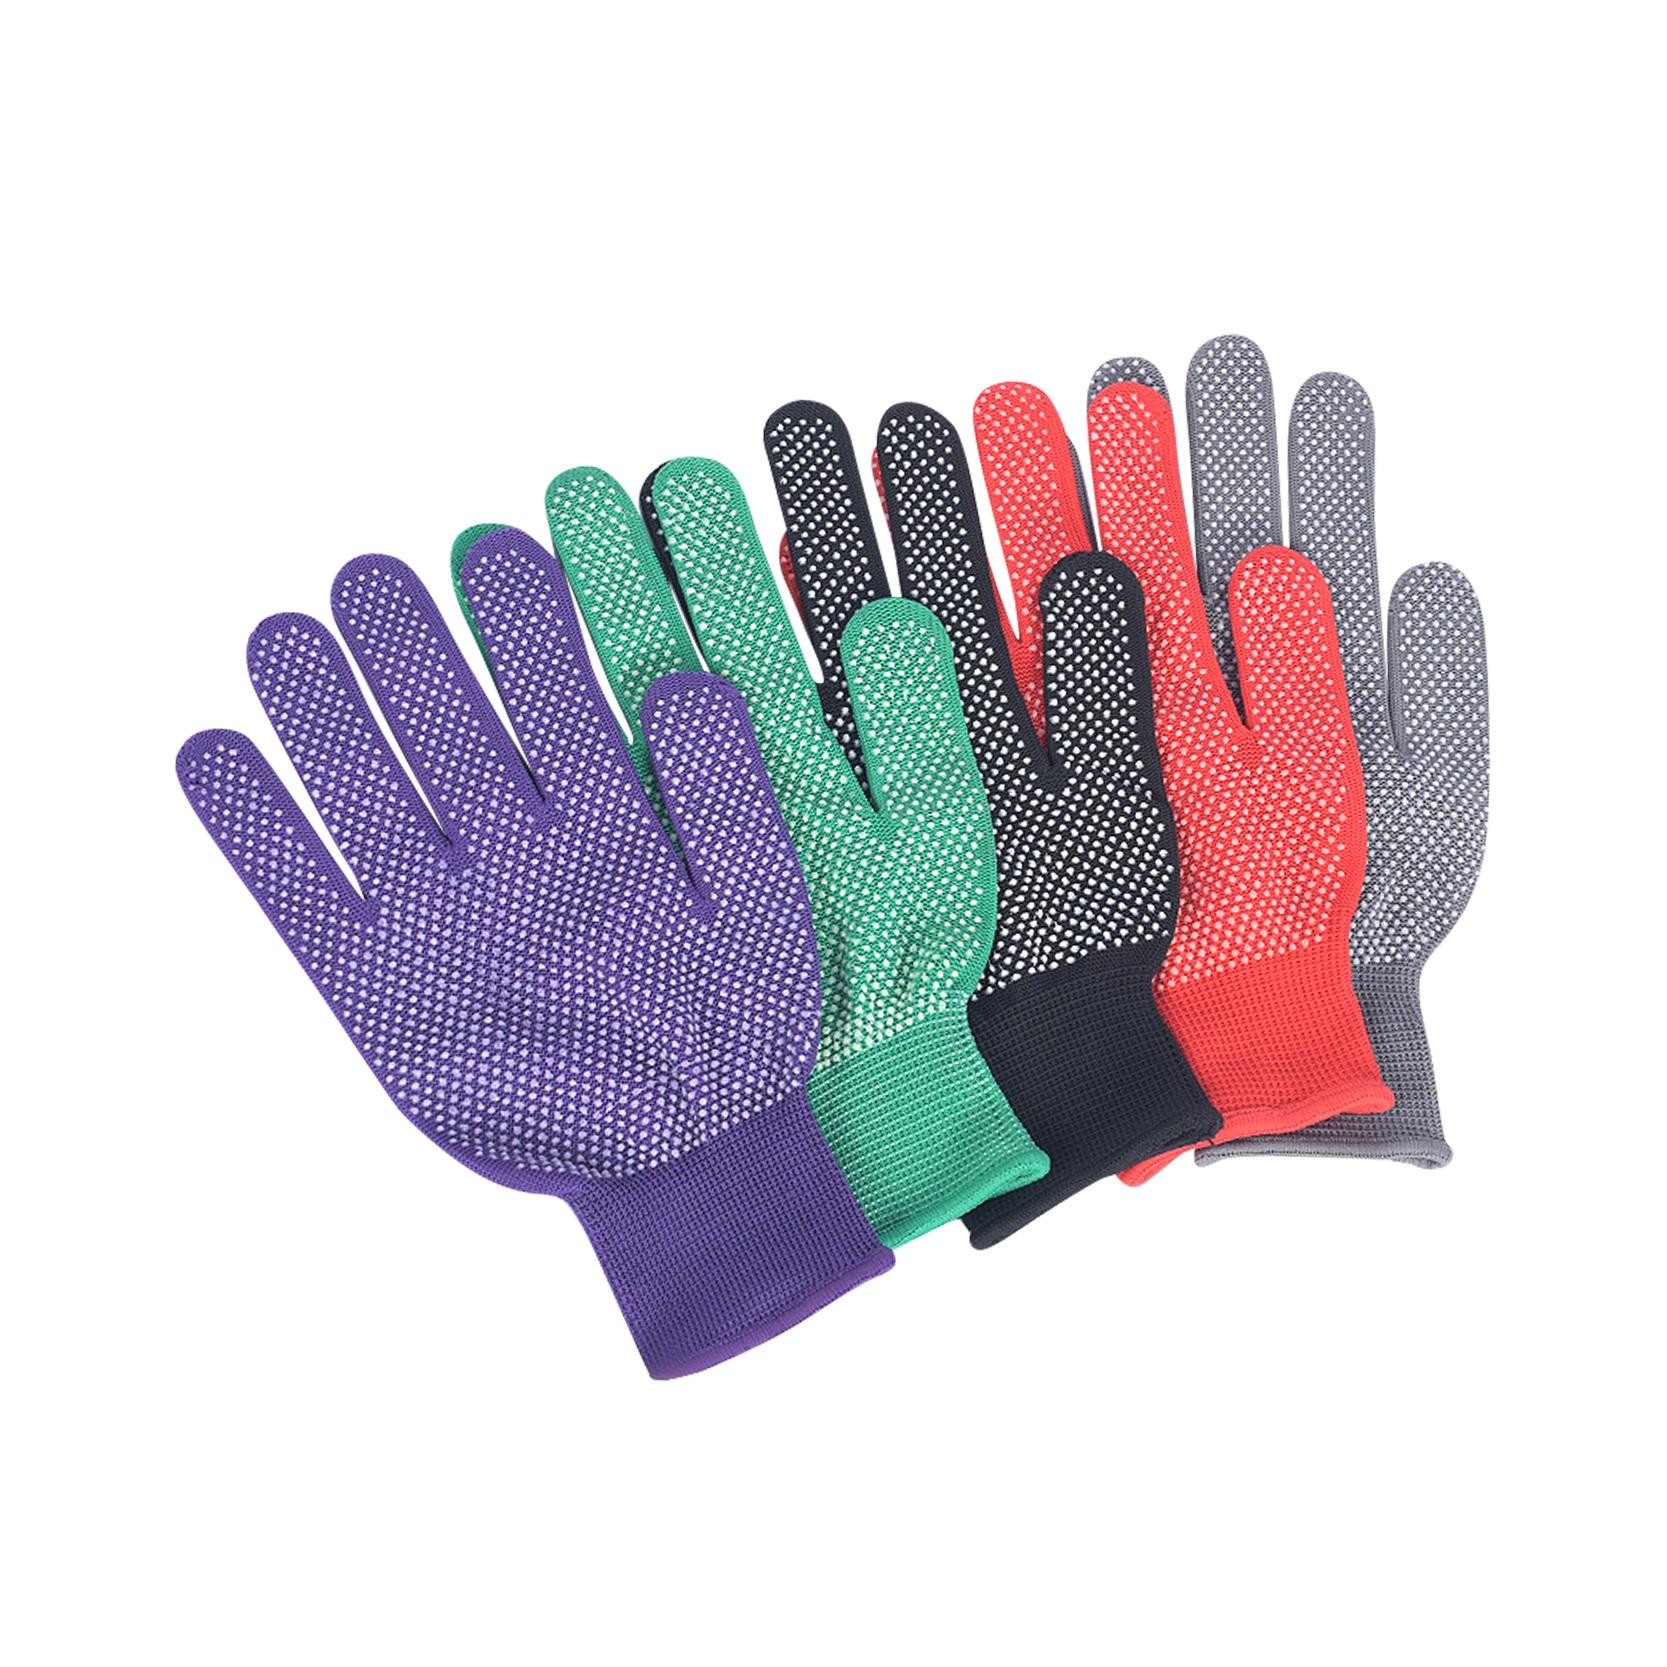 Malawakang Ginagamit na Light Industry Black Knitted Cotton Double 2 Sided Blue Pvc Dotted Safety Work Hand Gloves